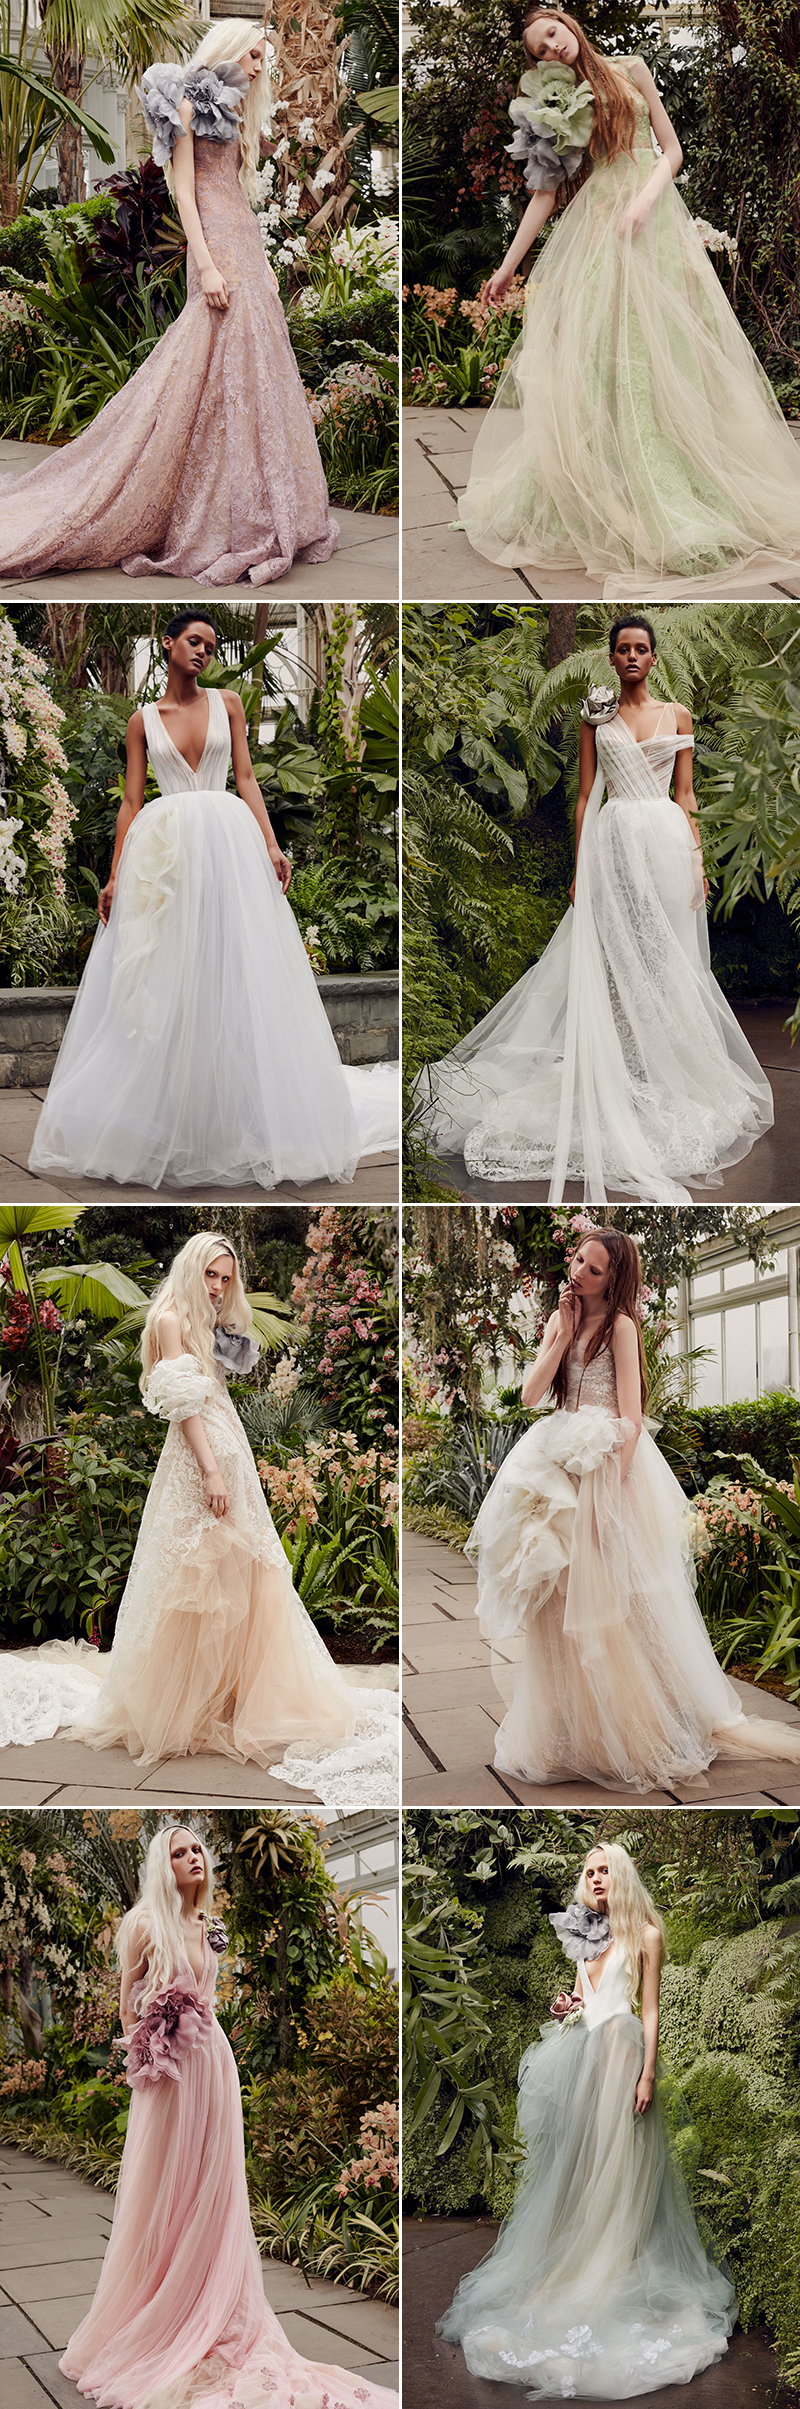 Our Top 5 Favourite Collections From The Spring 2020 Bridal